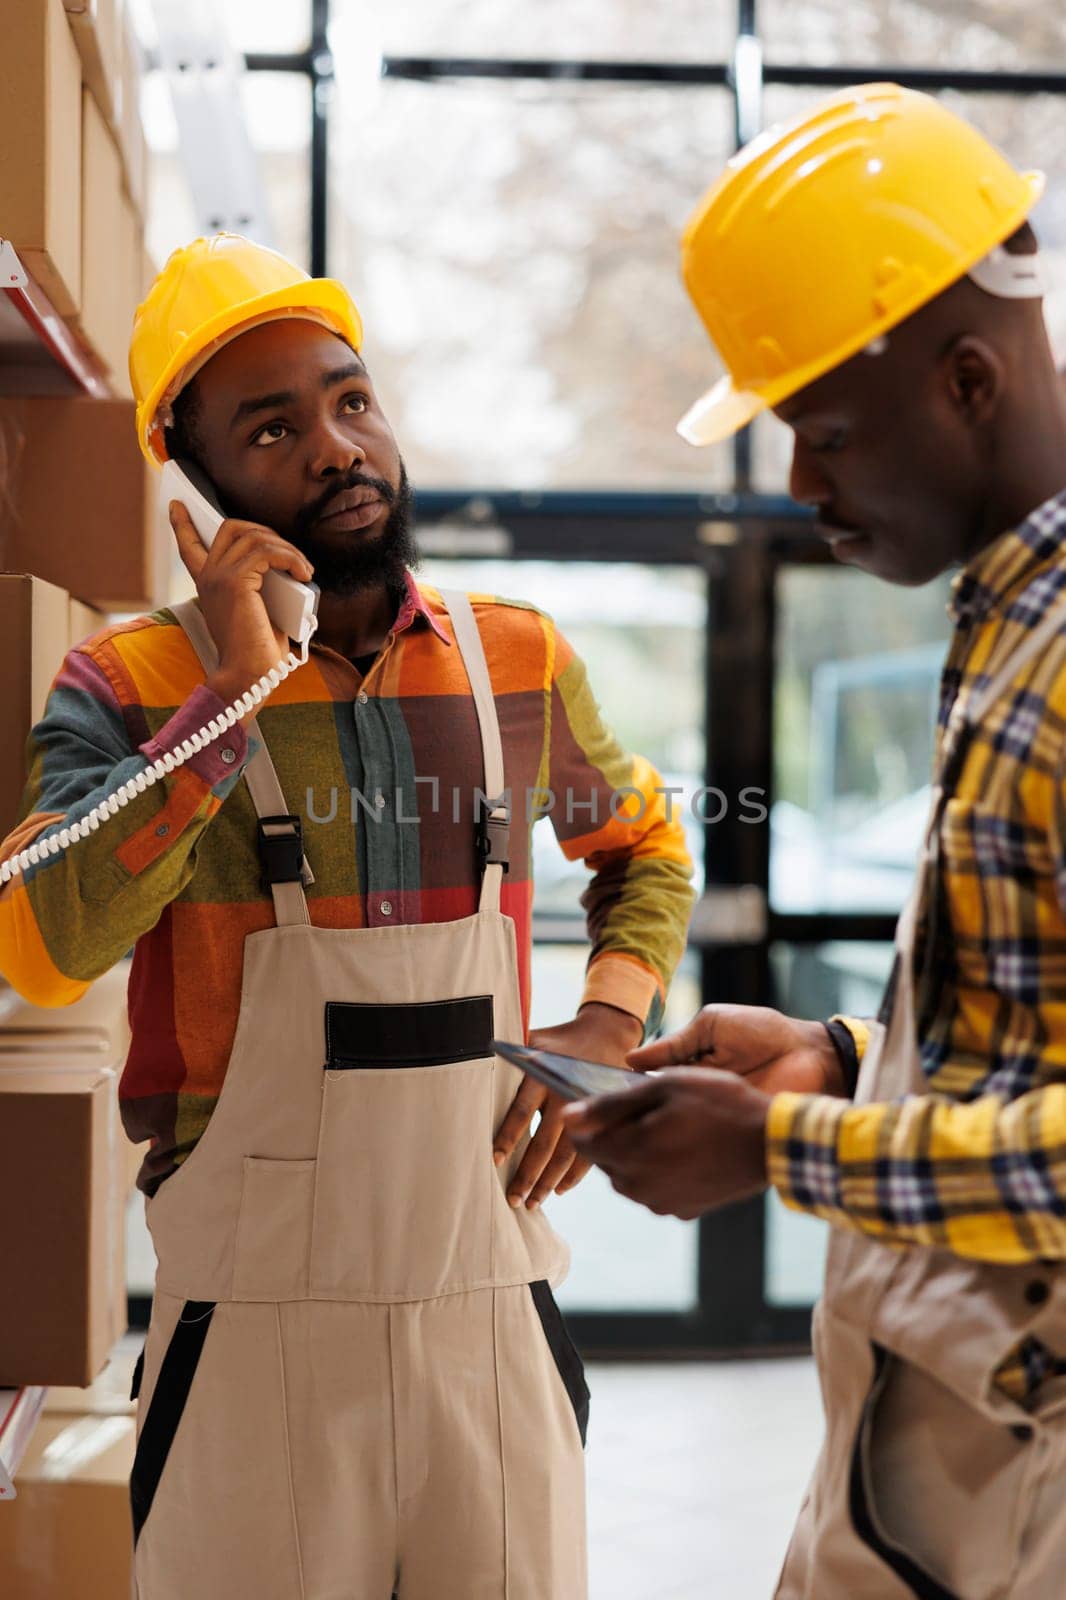 Warehouse manager listening to supervisor explaining inventory on phone by DCStudio